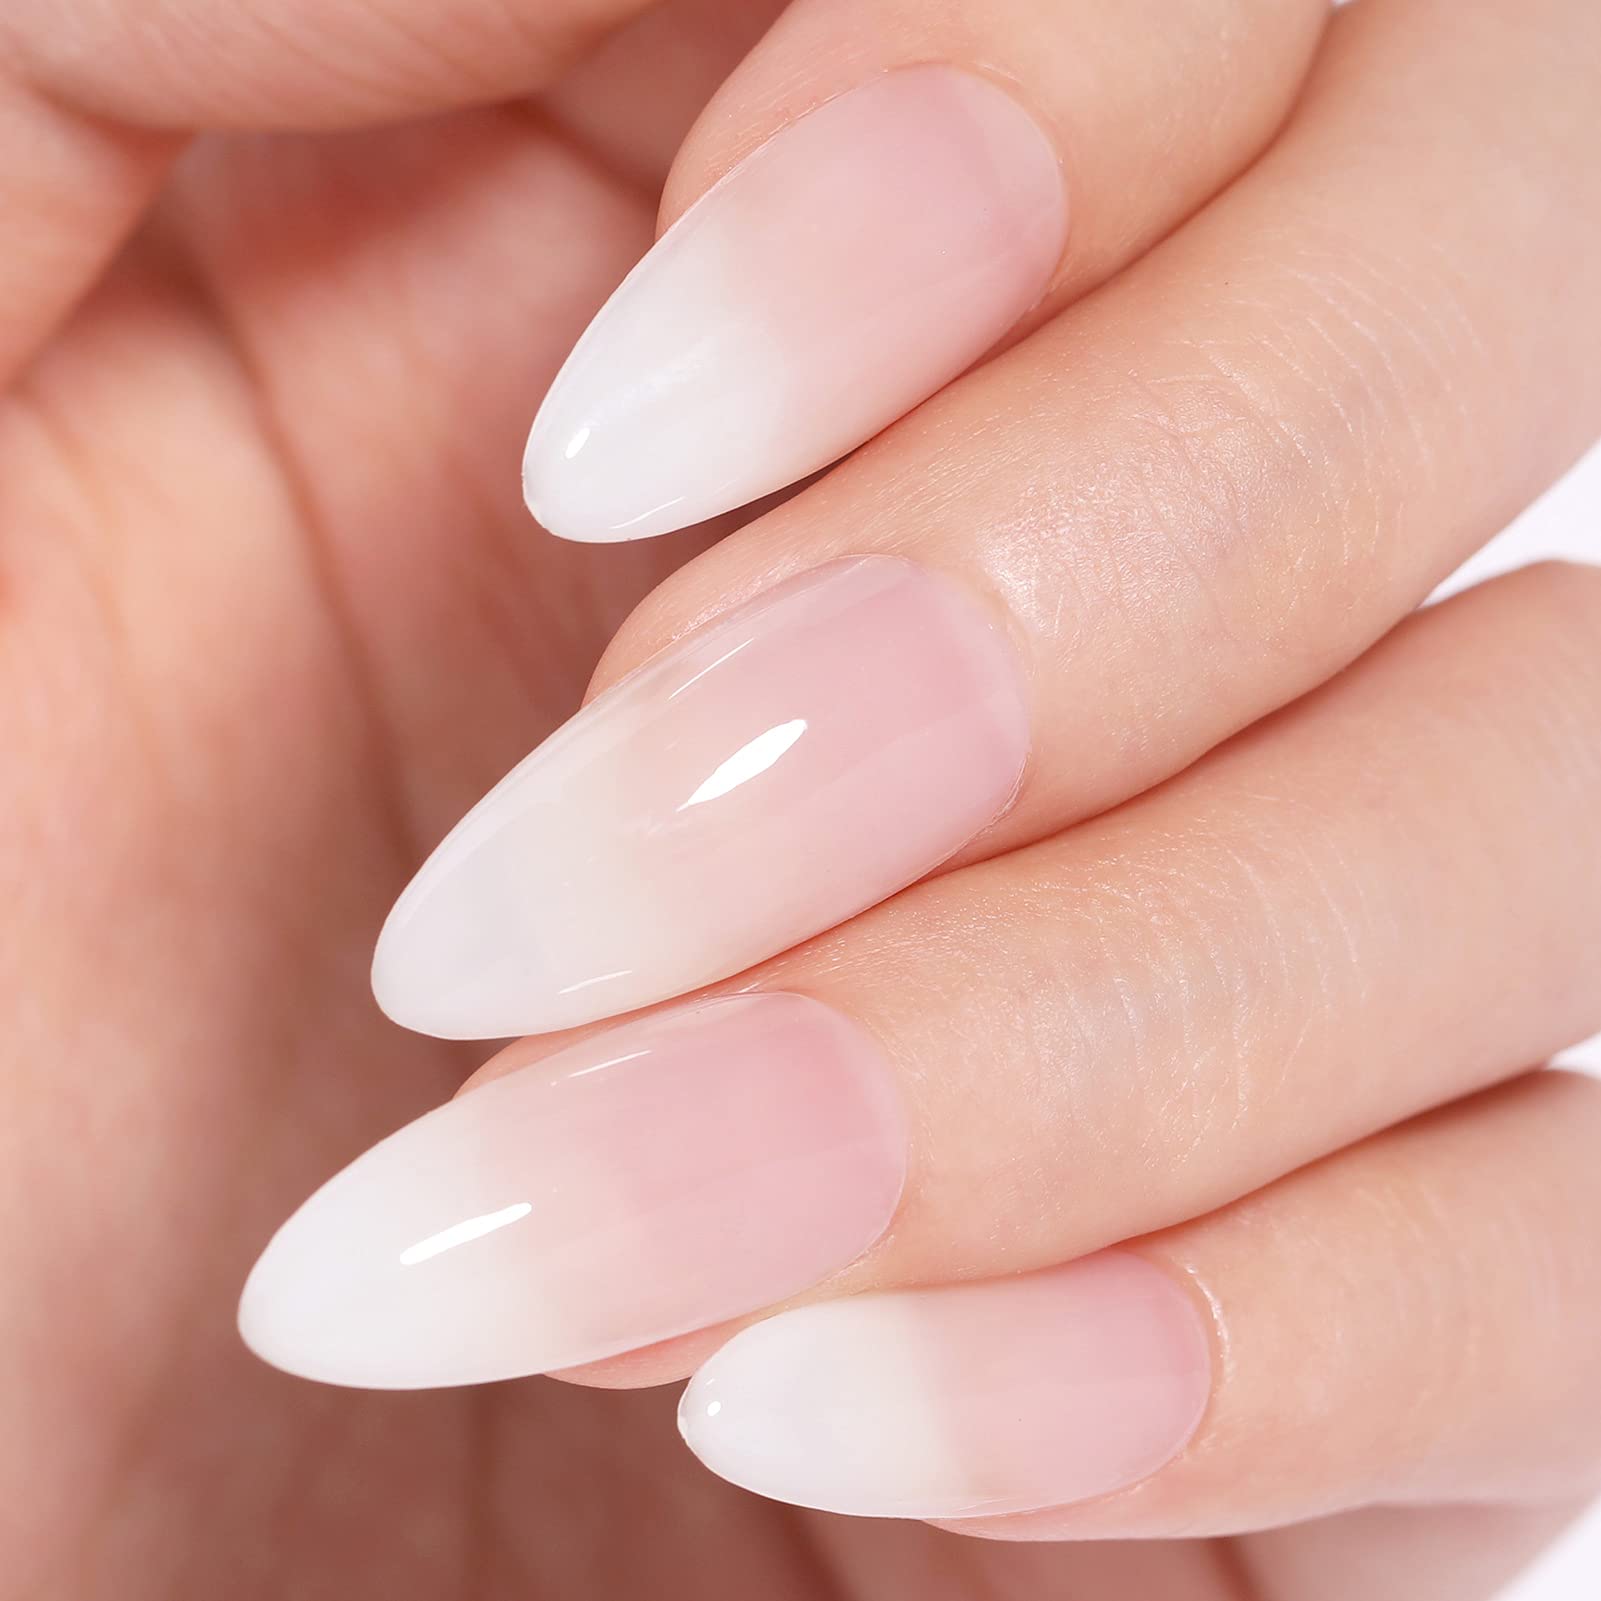 Coconut Milk Nails Are the Perfect Late Summer Manicure | Glamour